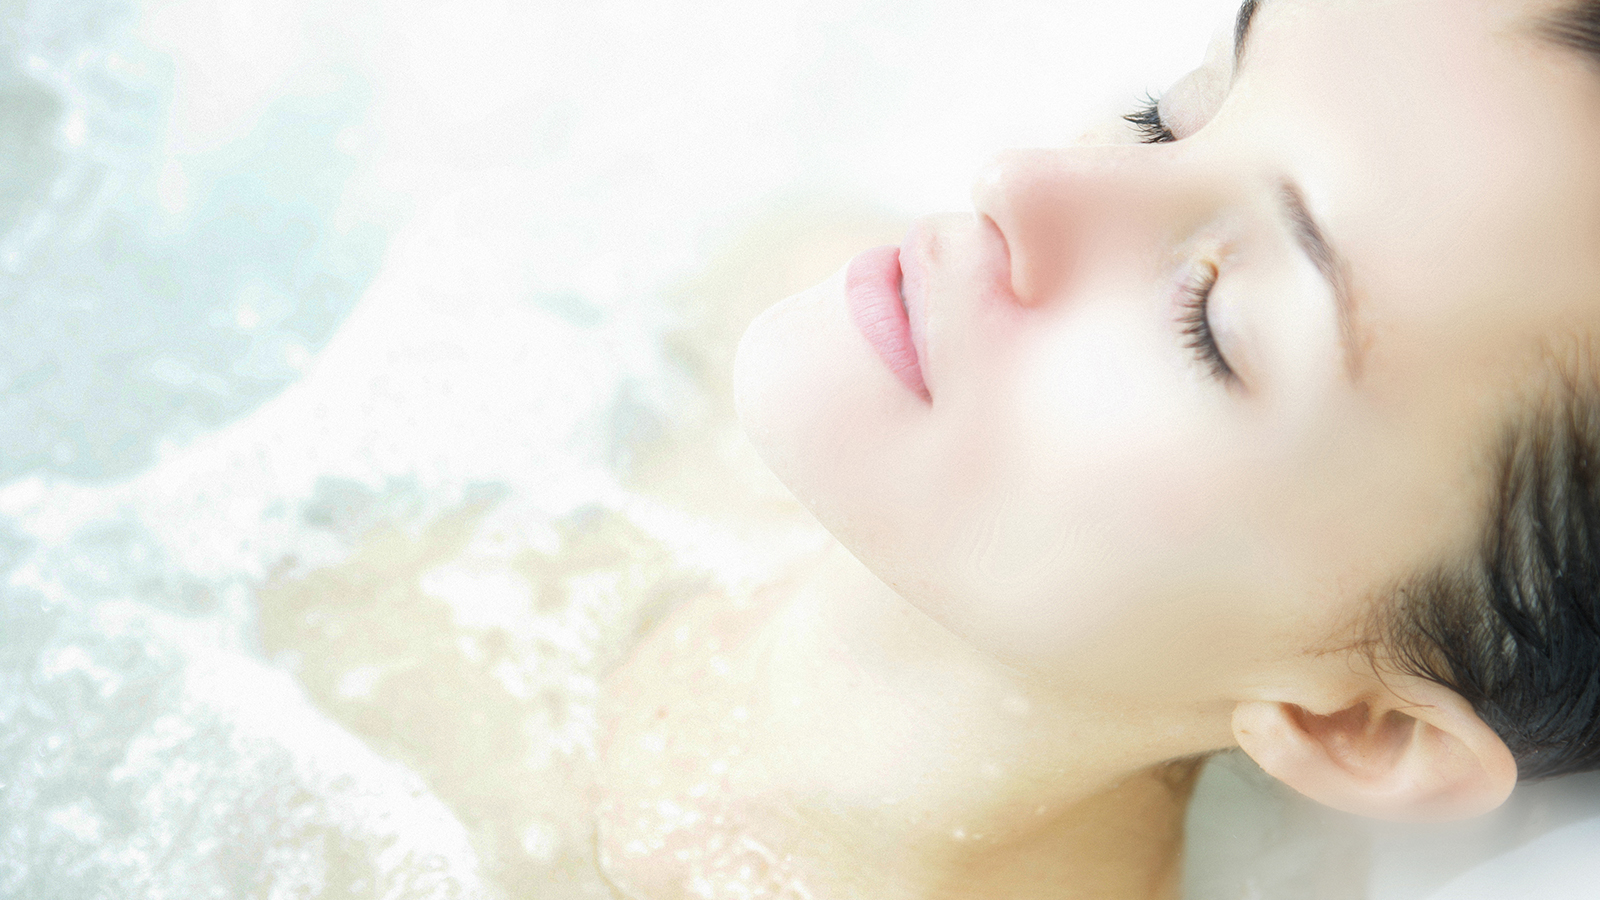 Image of a woman relaxing in a jetted deep soaking tub.